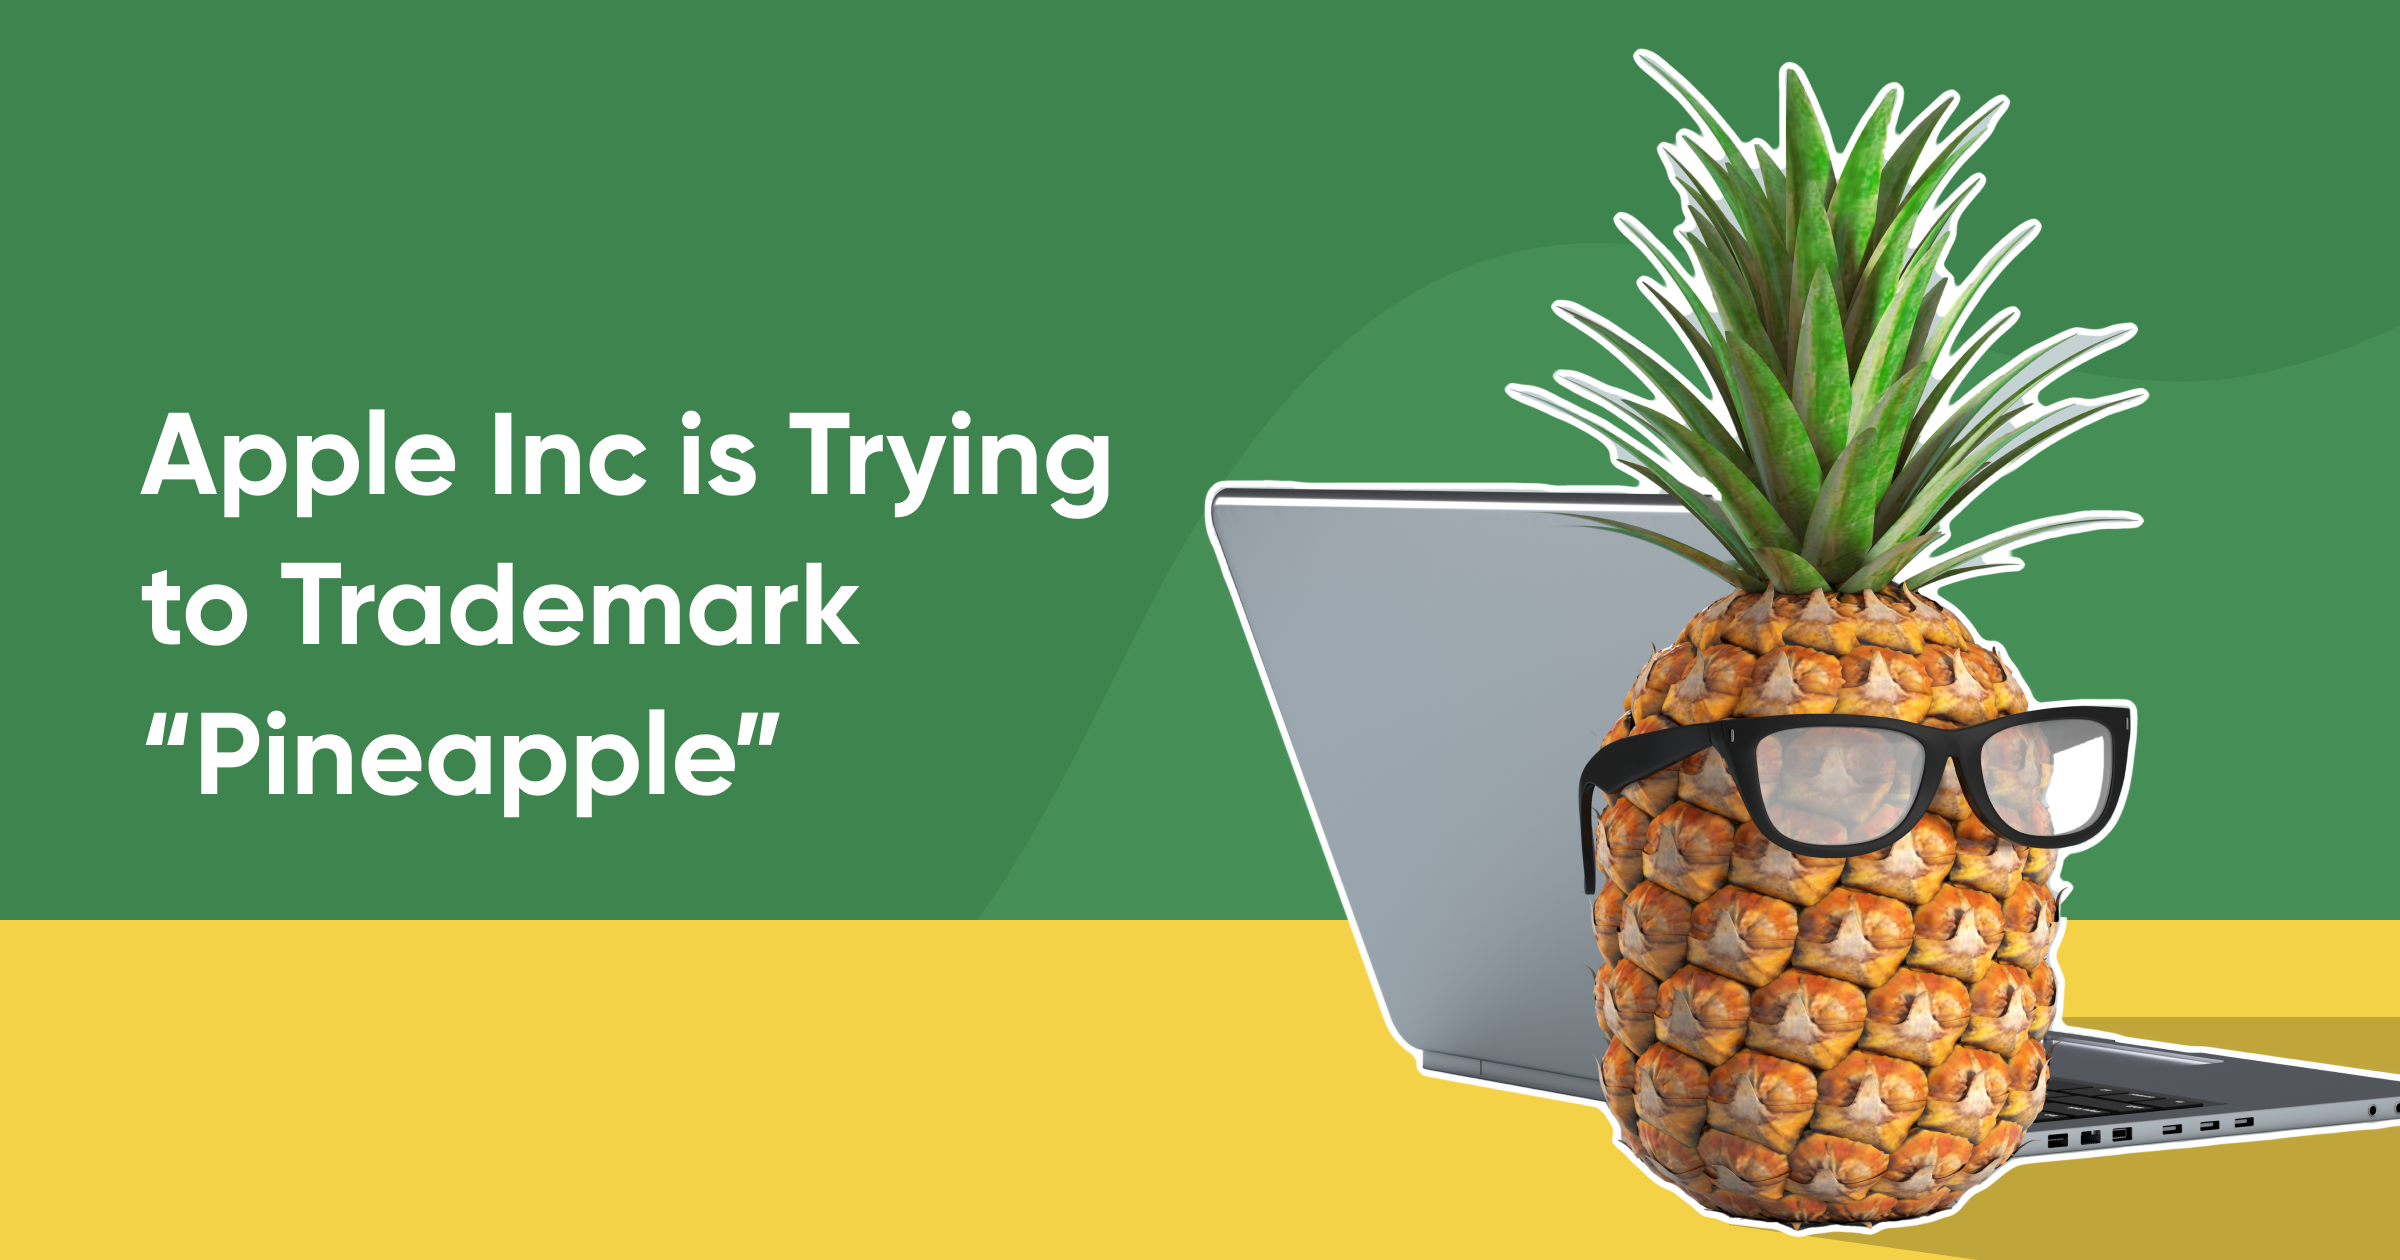 Apple Inc is Trying to Trademark “Pineapple”